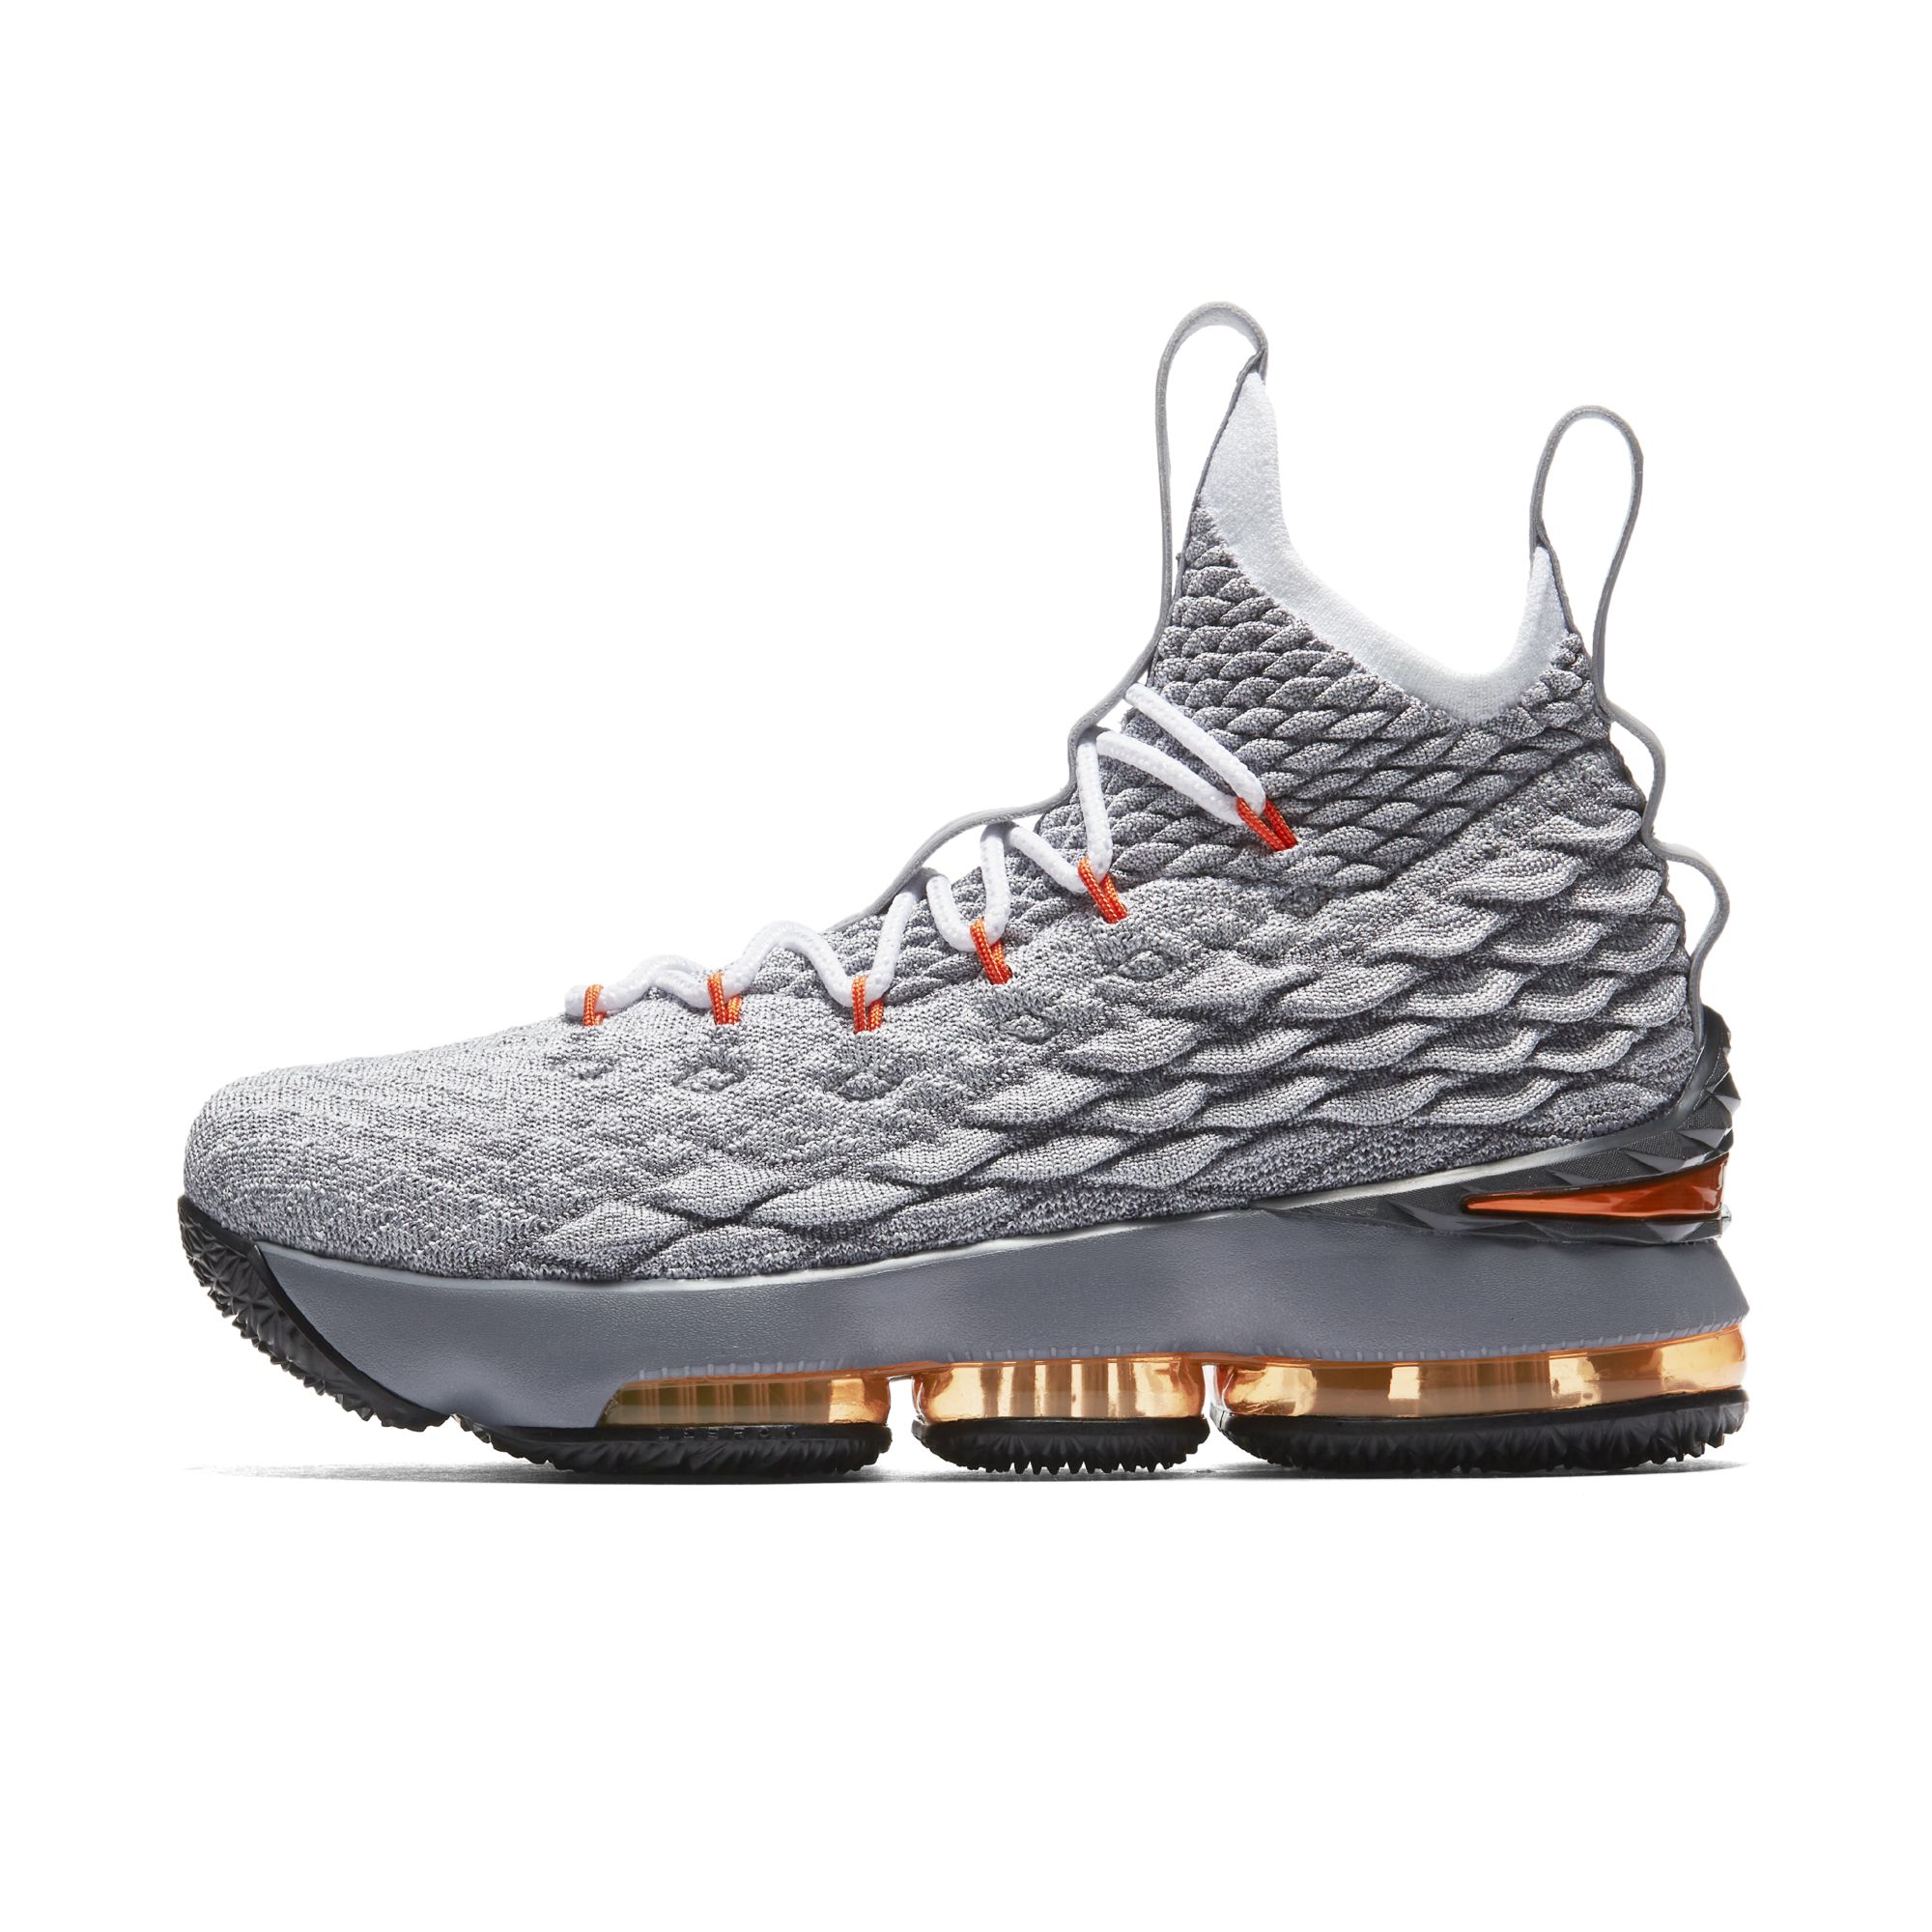 A New Reflective Nike LeBron 15 Will Drop After All-Star Weekend ...